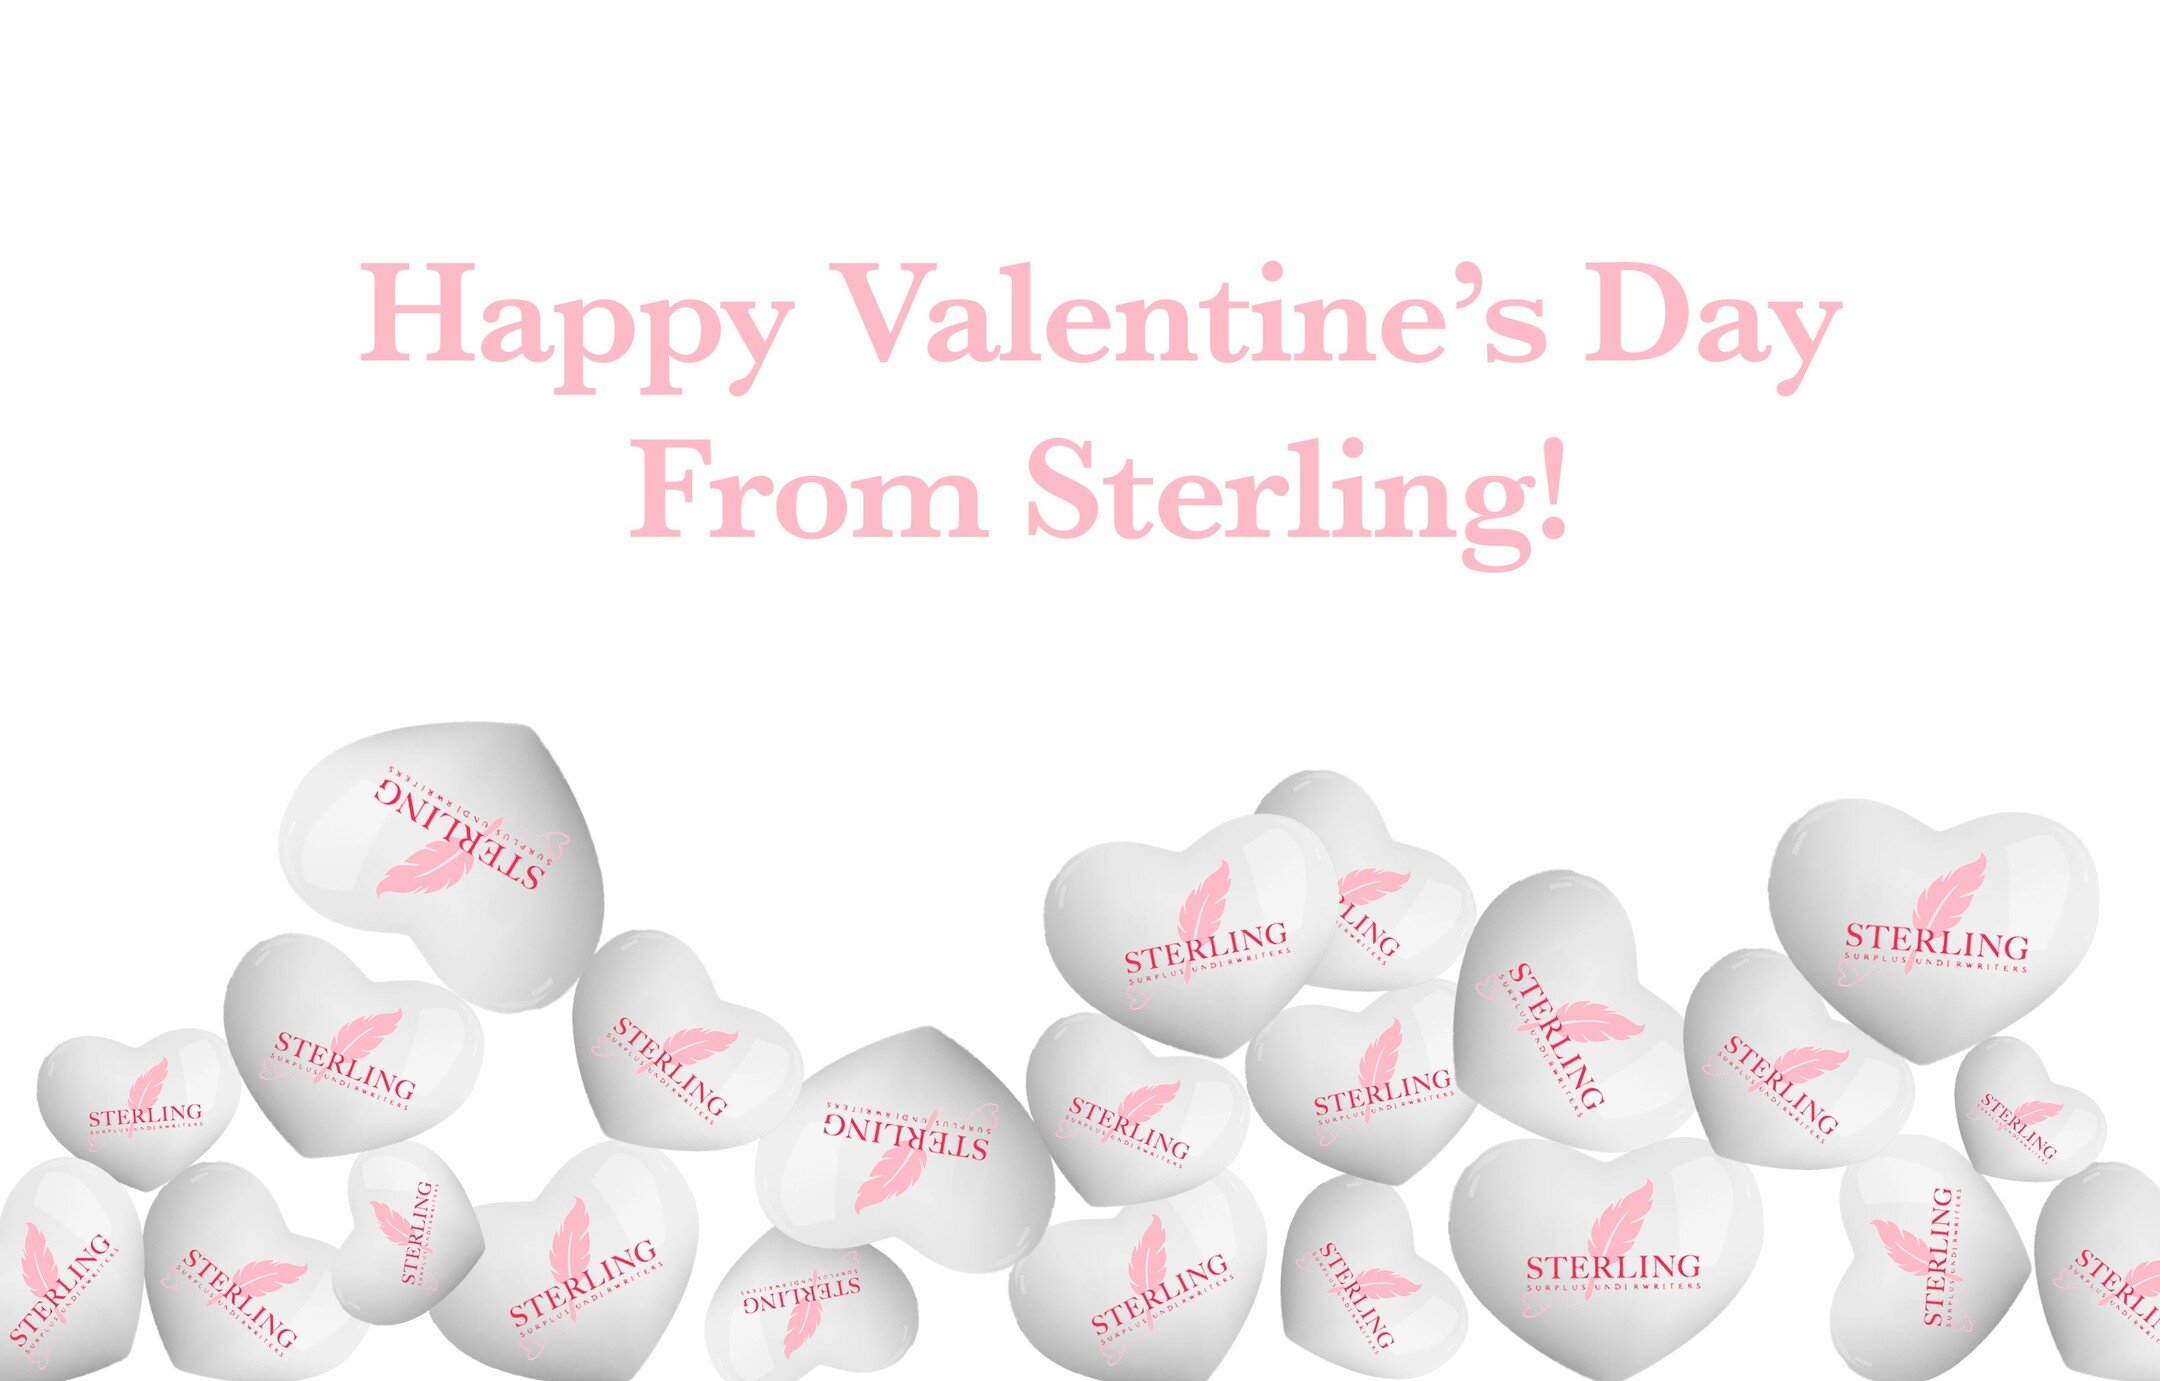 Happy Valentine's Day from Sterling!